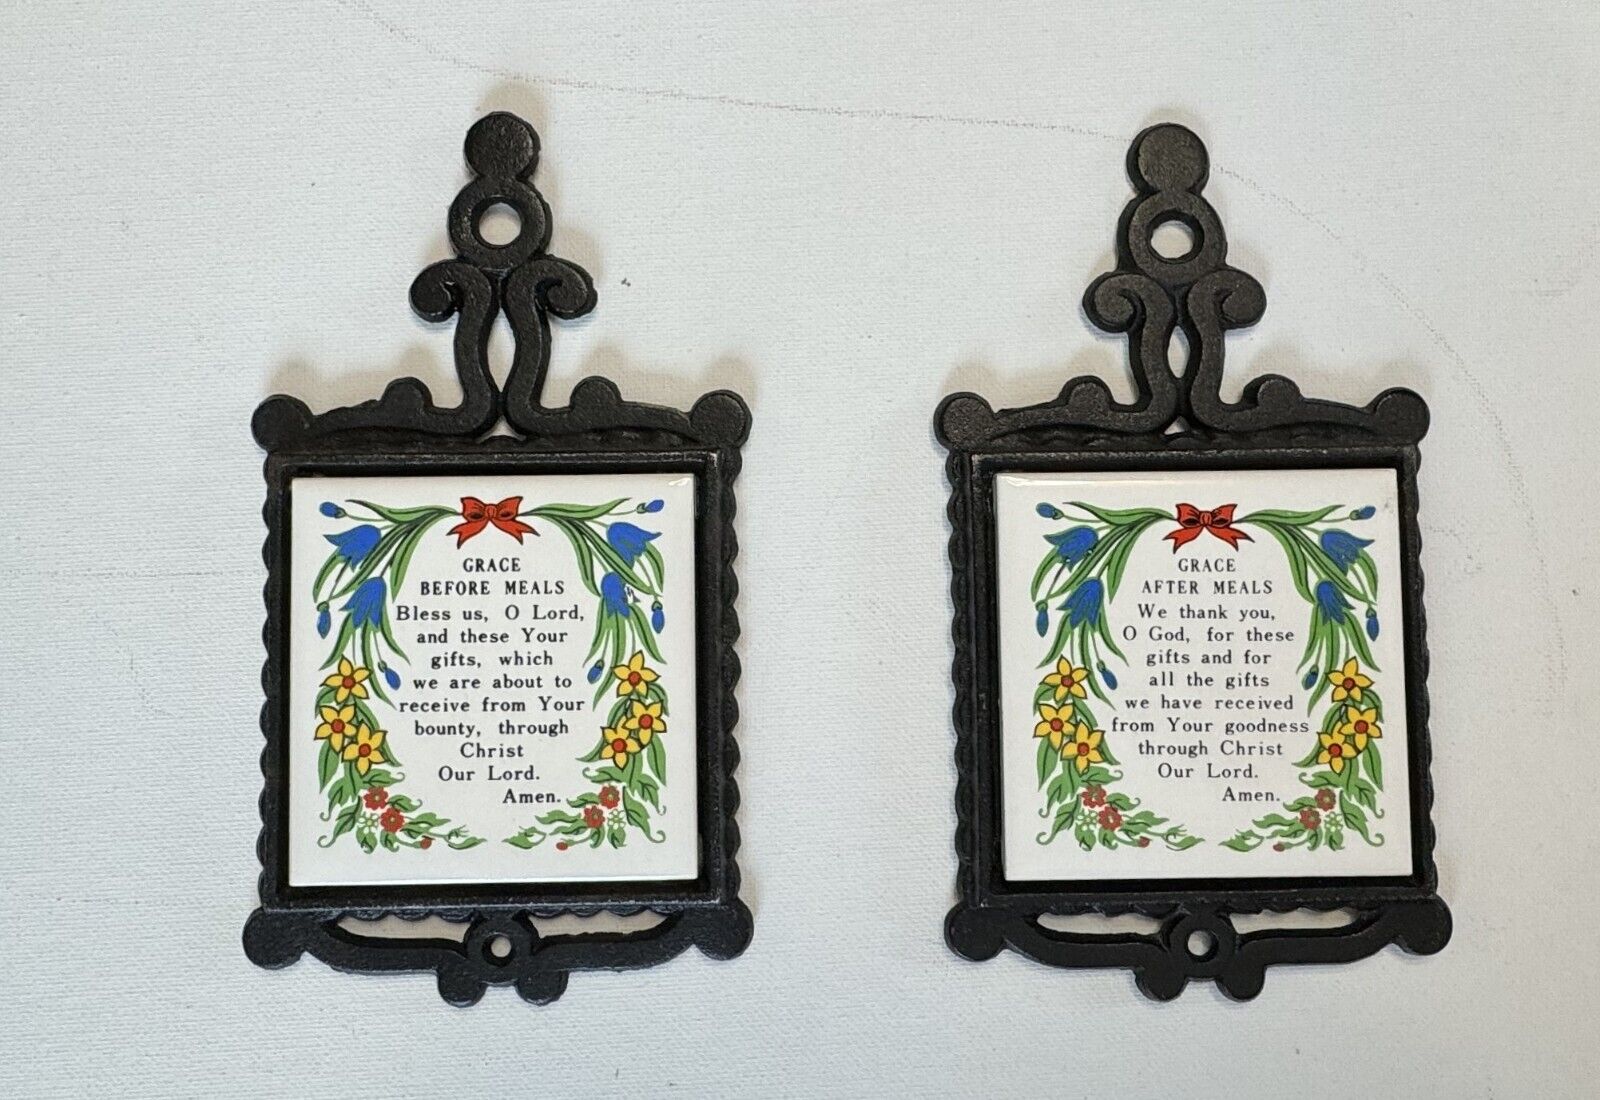 2 Vtg Retro Cast Iron & Tile Trivets Before & After Meal Prayer Wall Decorations